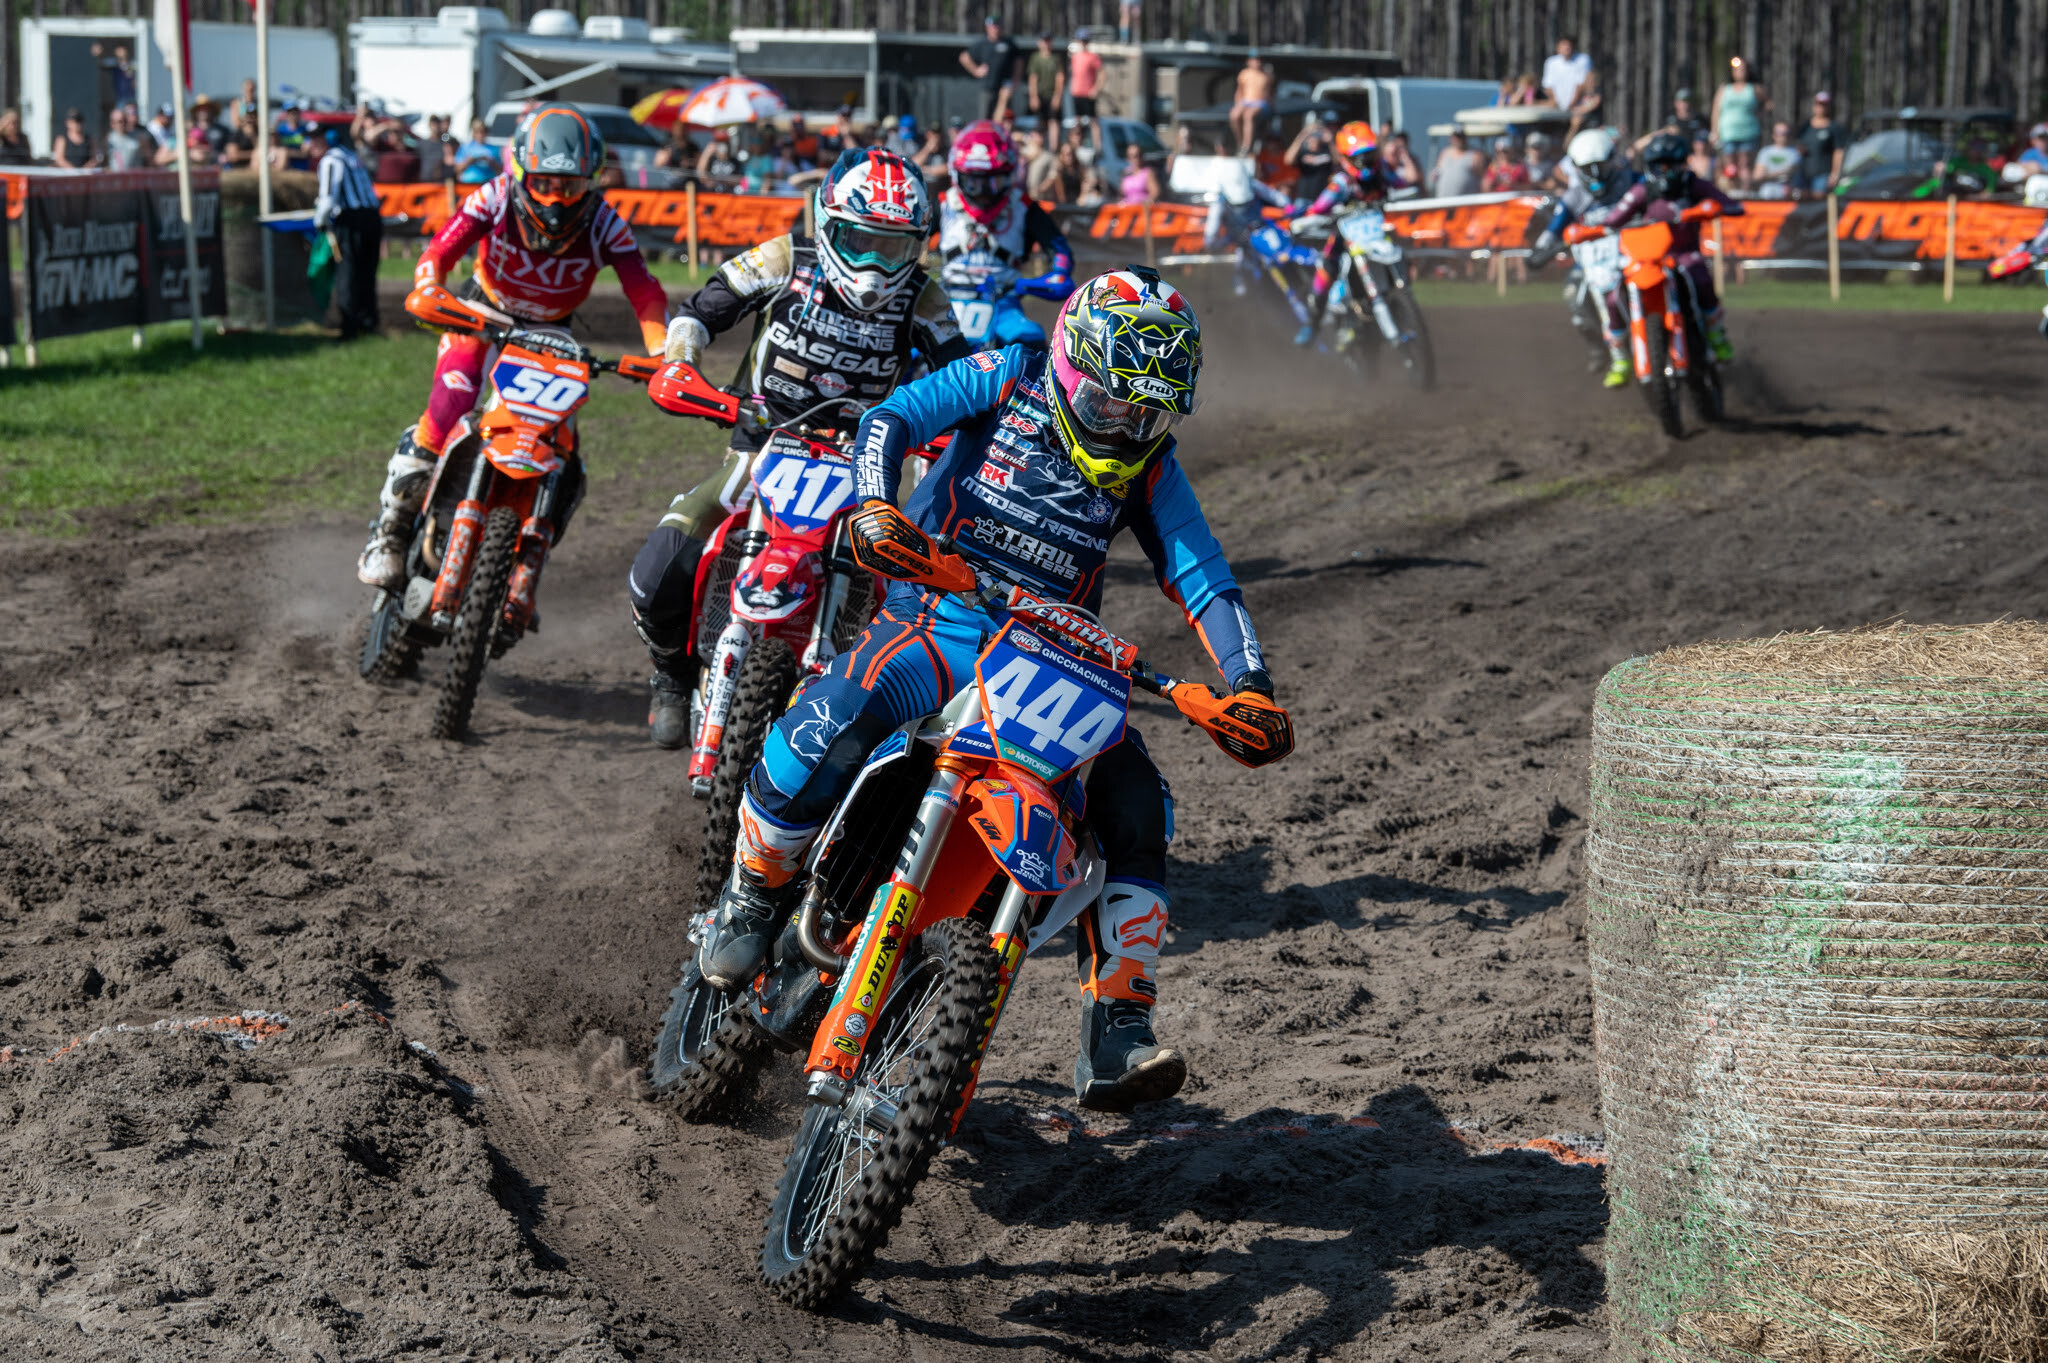 Korie Steed (Trail Jesters KTM Racing) grabbed the Trail Jesters holeshot, leading the way and earning her second-straight win in 2023.